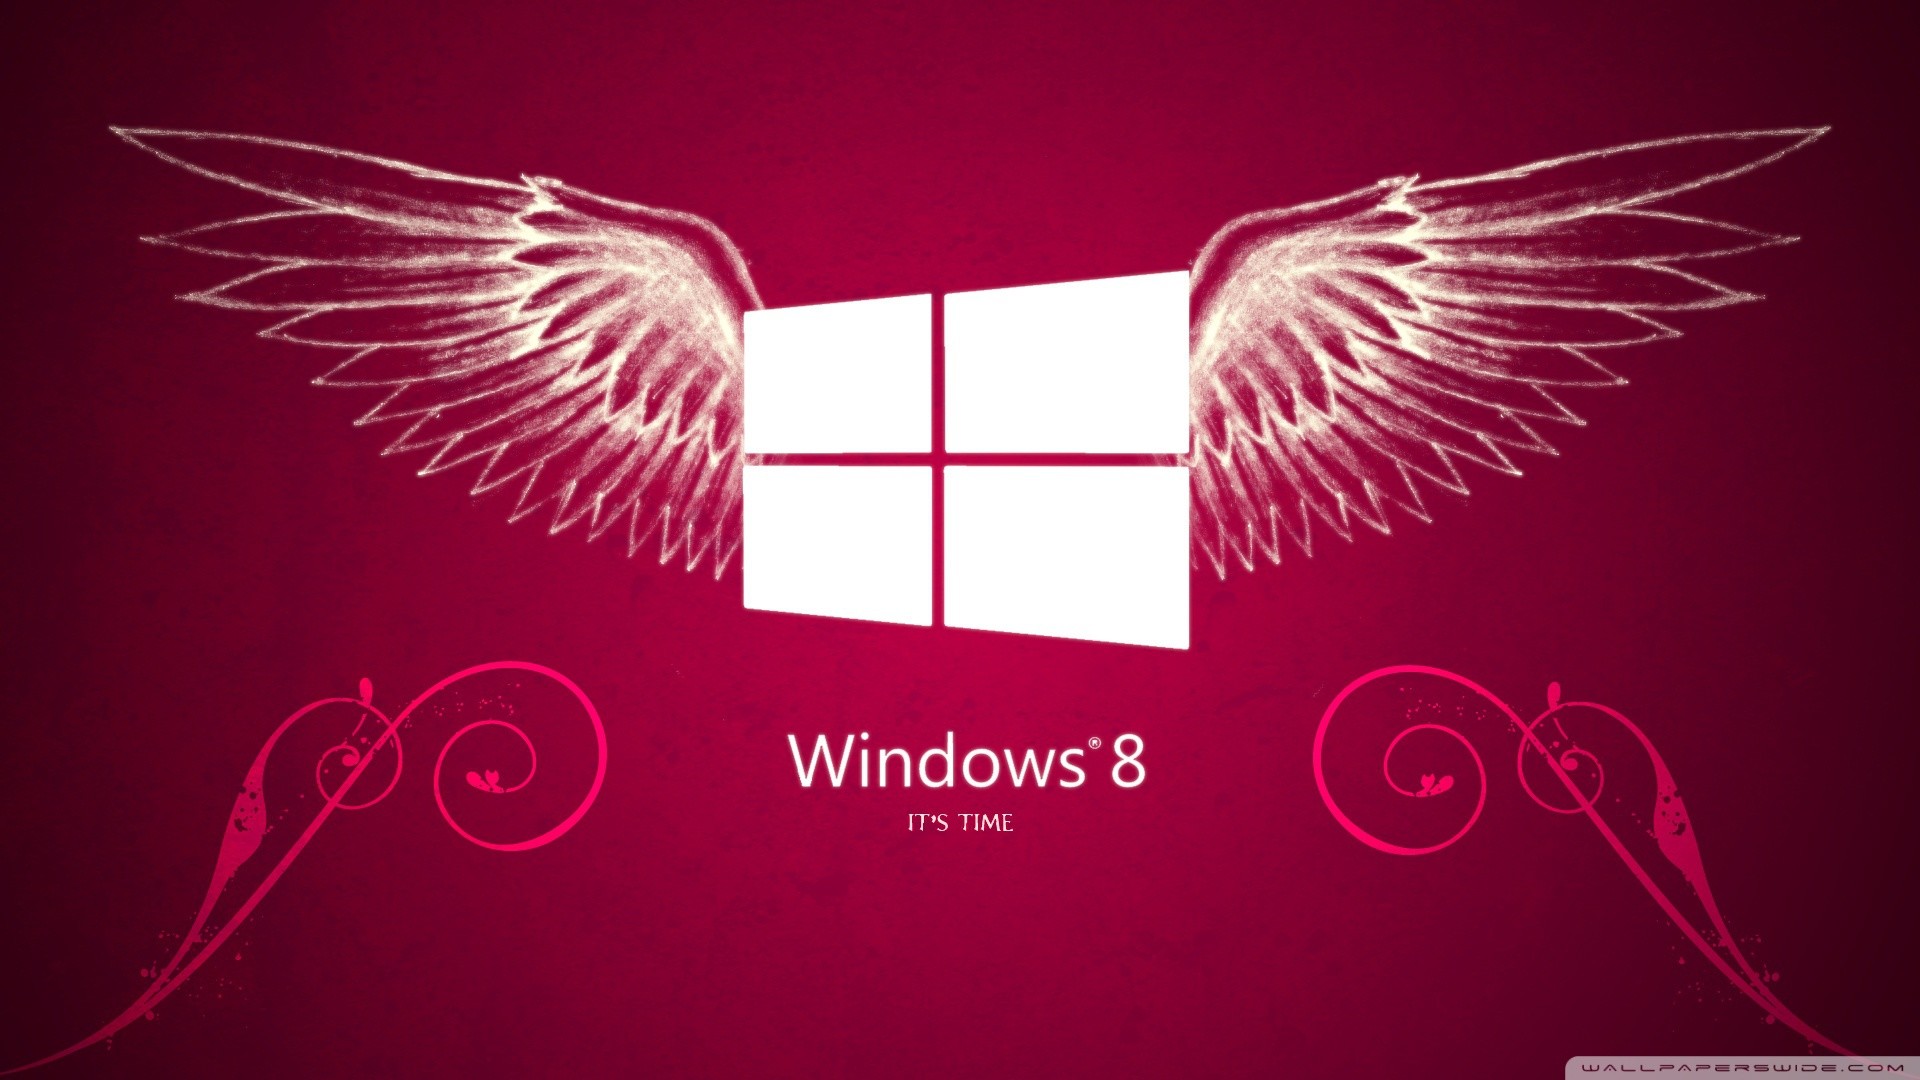 1920x1080 Windows 8 big red logo with wings